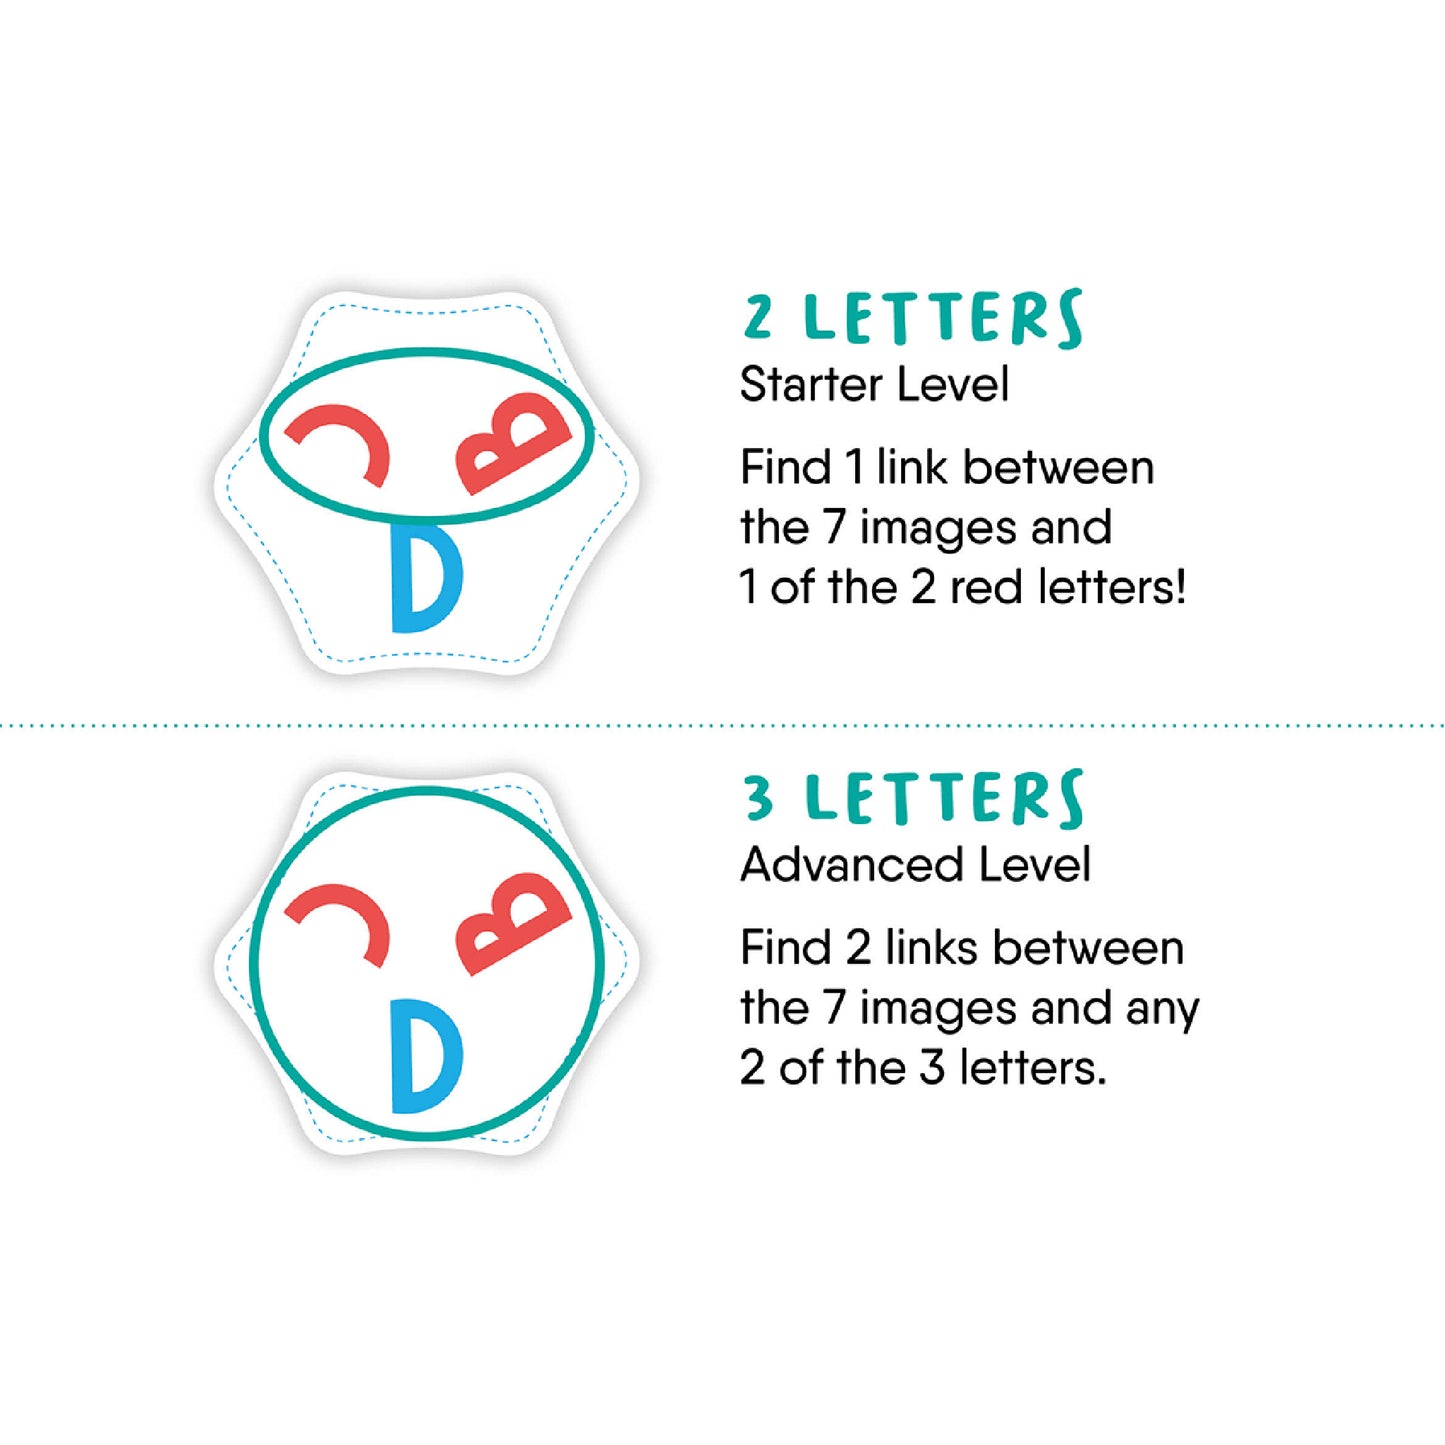 Summary of two ways to play Letter Links by FLEXIQ.